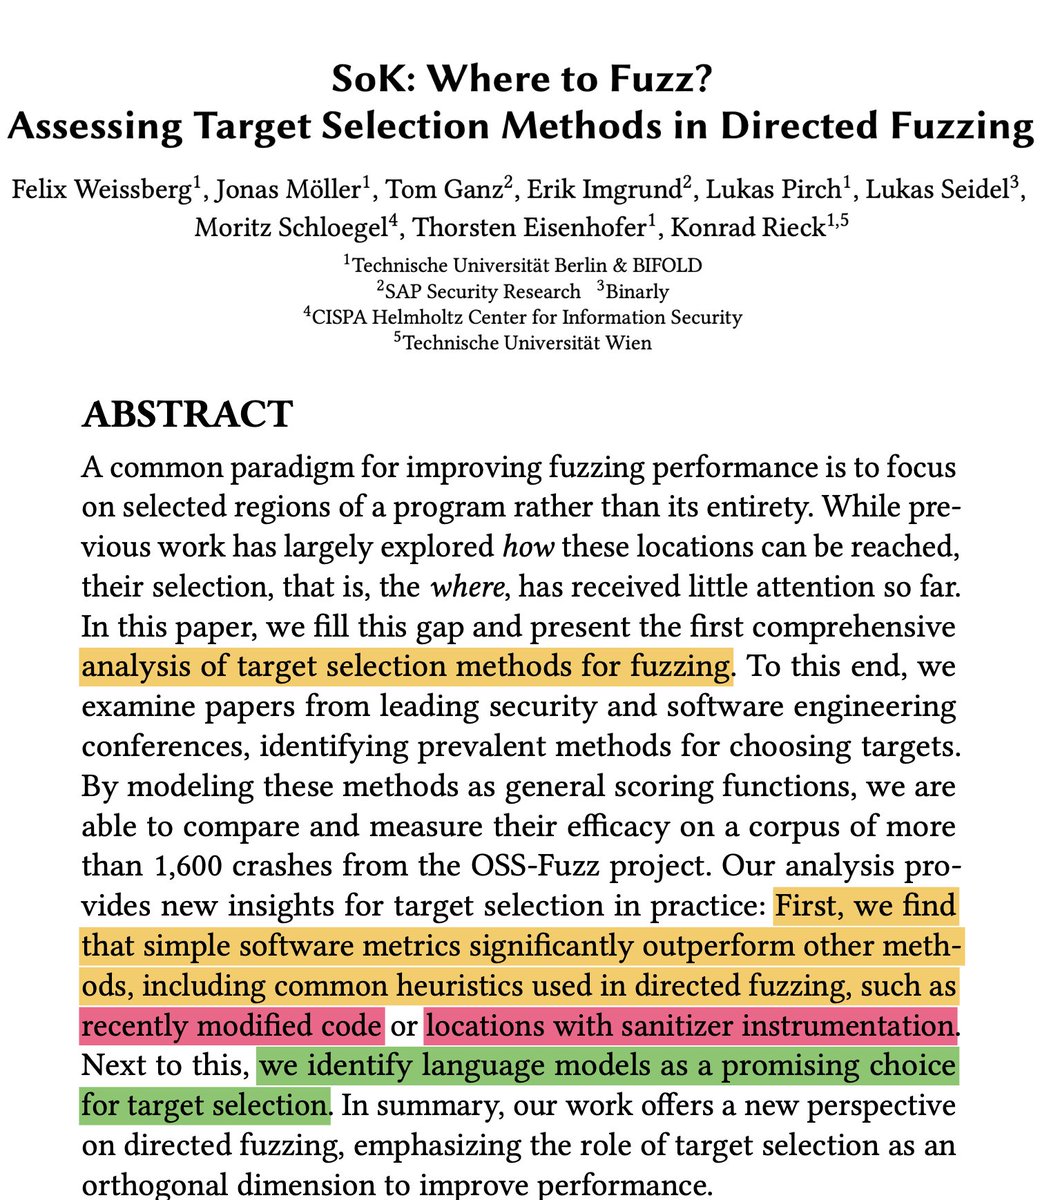 Recently modified code and sanitizer instrumentation seem to be among the most effective heuristics for target selection in directed #fuzzing according to this recent SoK by Weissberg et al. LLMs show much promise for target selection, too.

📝 mlsec.org/docs/2024c-asi…